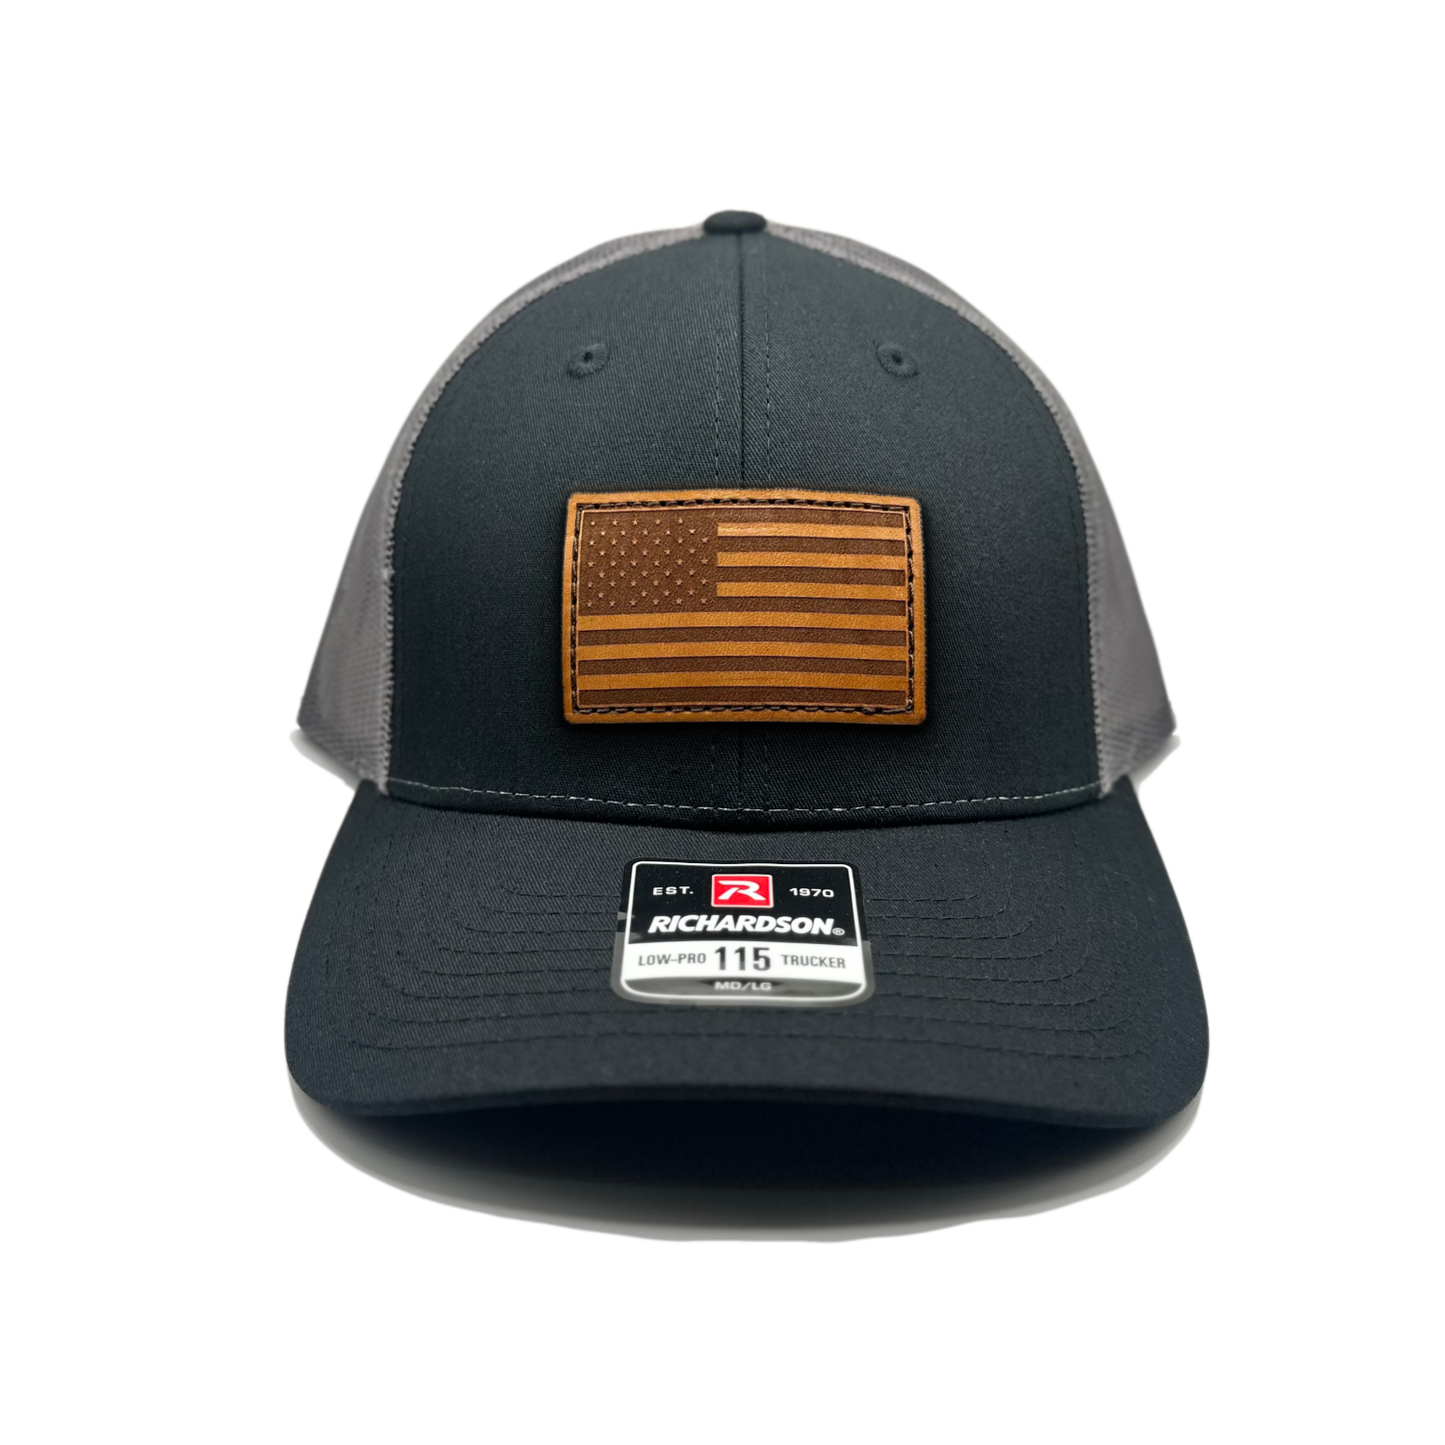 Image of a Black/Charcoal Richardson 115 hat with an American flag patch made of genuine leather, laser engraved and securely sewn onto the hat. The low profile trucker style hat is adjustable to fit small or M/L sizes, offering a versatile and fashionable accessory for any occasion."